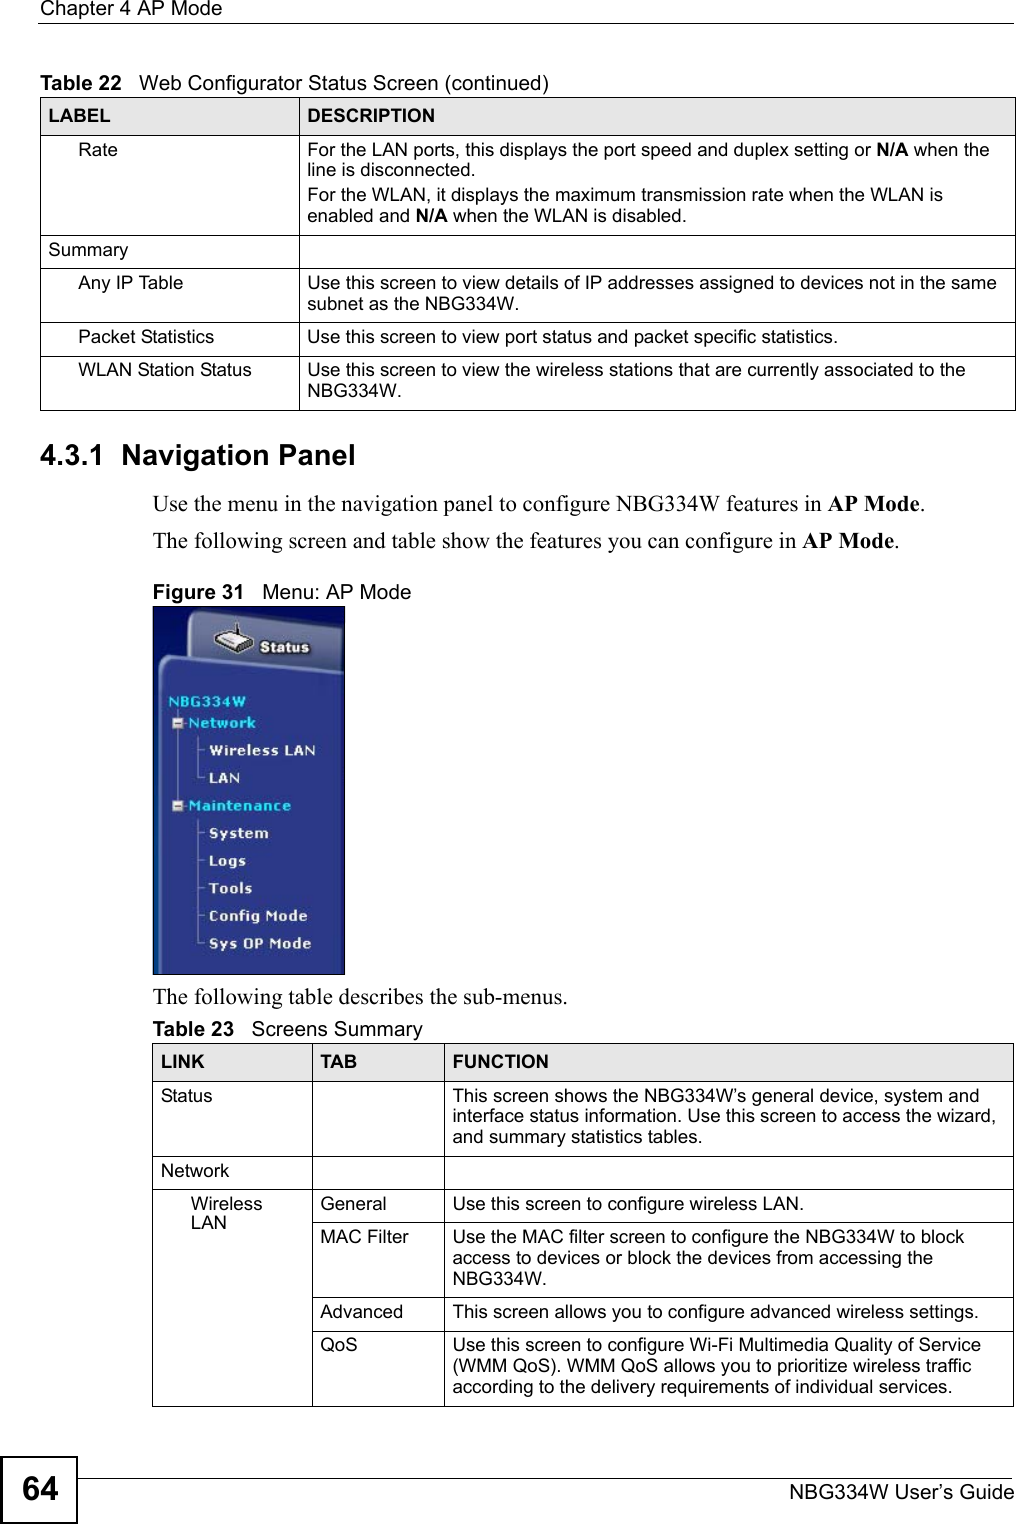 Chapter 4 AP ModeNBG334W User’s Guide644.3.1  Navigation PanelUse the menu in the navigation panel to configure NBG334W features in AP Mode.The following screen and table show the features you can configure in AP Mode.Figure 31   Menu: AP ModeThe following table describes the sub-menus.Rate For the LAN ports, this displays the port speed and duplex setting or N/A when the line is disconnected.For the WLAN, it displays the maximum transmission rate when the WLAN is enabled and N/A when the WLAN is disabled.SummaryAny IP Table Use this screen to view details of IP addresses assigned to devices not in the same subnet as the NBG334W.Packet Statistics Use this screen to view port status and packet specific statistics.WLAN Station Status Use this screen to view the wireless stations that are currently associated to the NBG334W.Table 22   Web Configurator Status Screen (continued)LABEL DESCRIPTIONTable 23   Screens SummaryLINK TAB FUNCTIONStatus This screen shows the NBG334W’s general device, system and interface status information. Use this screen to access the wizard, and summary statistics tables.NetworkWireless LANGeneral Use this screen to configure wireless LAN.MAC Filter Use the MAC filter screen to configure the NBG334W to block access to devices or block the devices from accessing the NBG334W.Advanced This screen allows you to configure advanced wireless settings.QoS Use this screen to configure Wi-Fi Multimedia Quality of Service (WMM QoS). WMM QoS allows you to prioritize wireless traffic according to the delivery requirements of individual services.